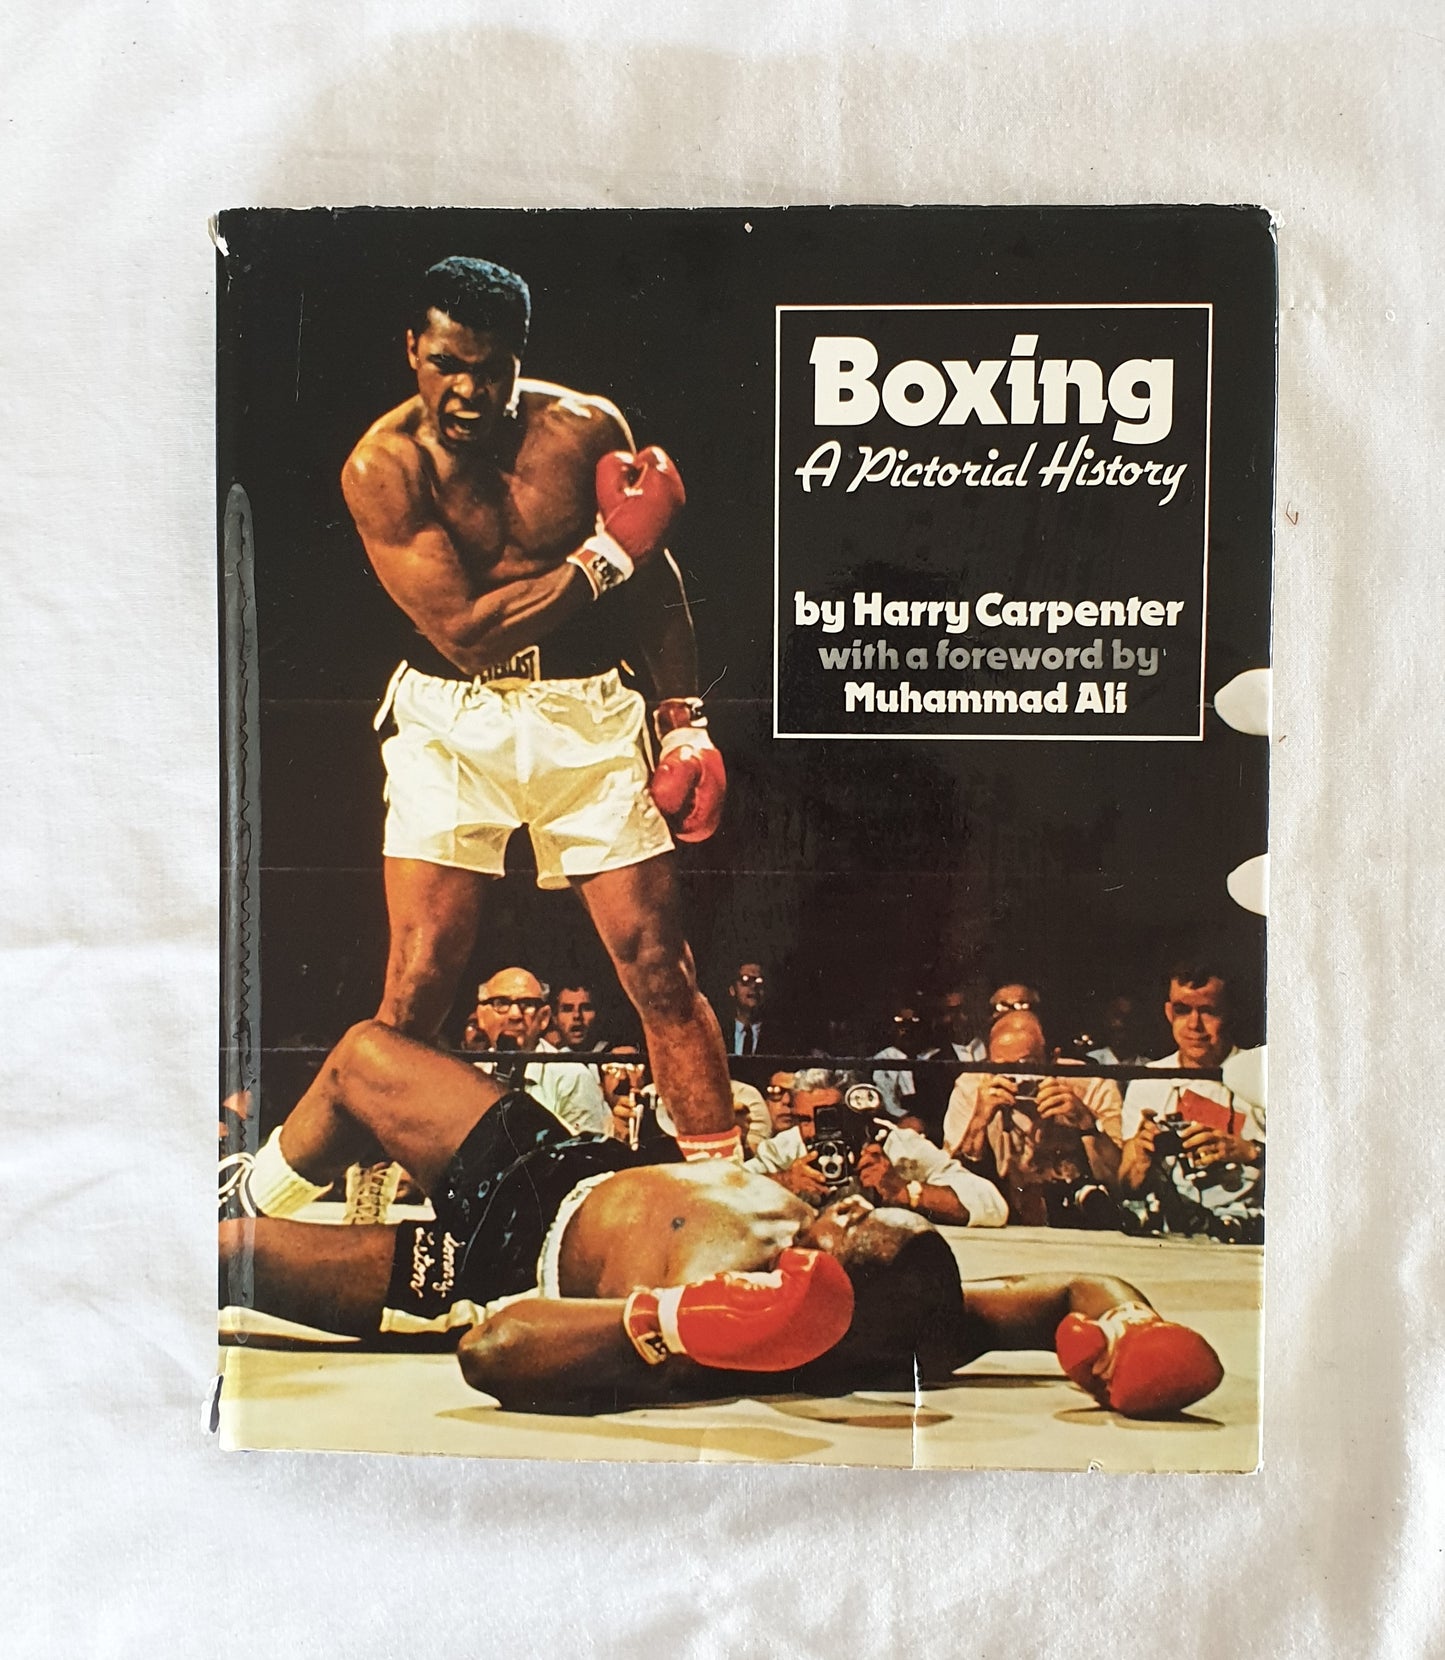 Boxing: A Pictorial History  by Harry Carpenter  foreword by Muhammad Ali